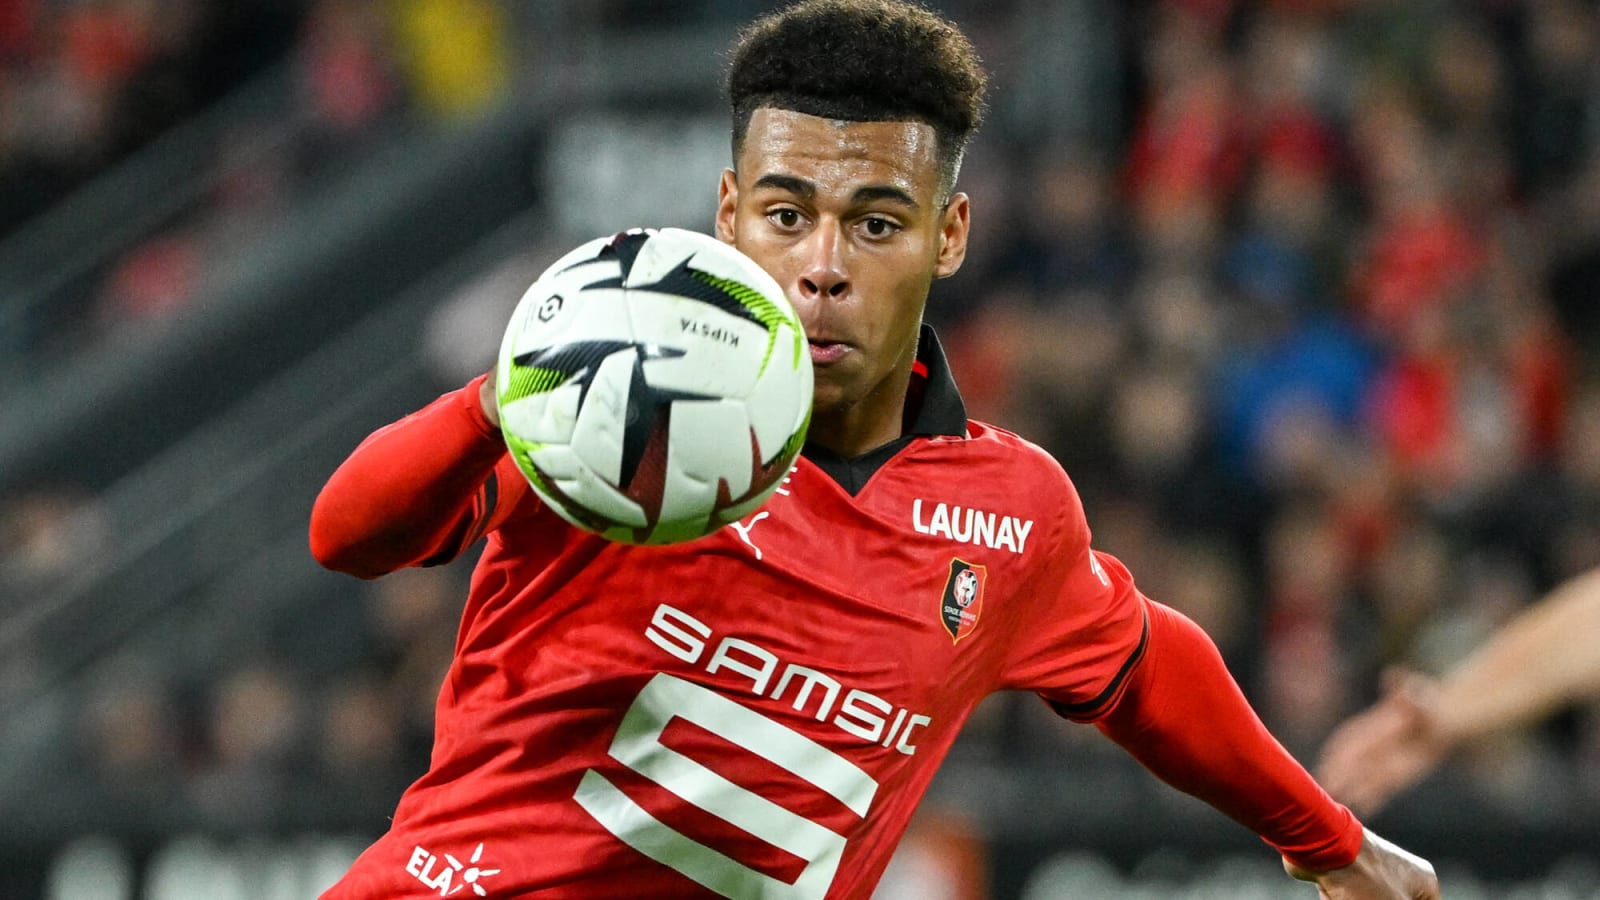 Newcastle make enquiry for 18-year-old Frenchman, set to make their move